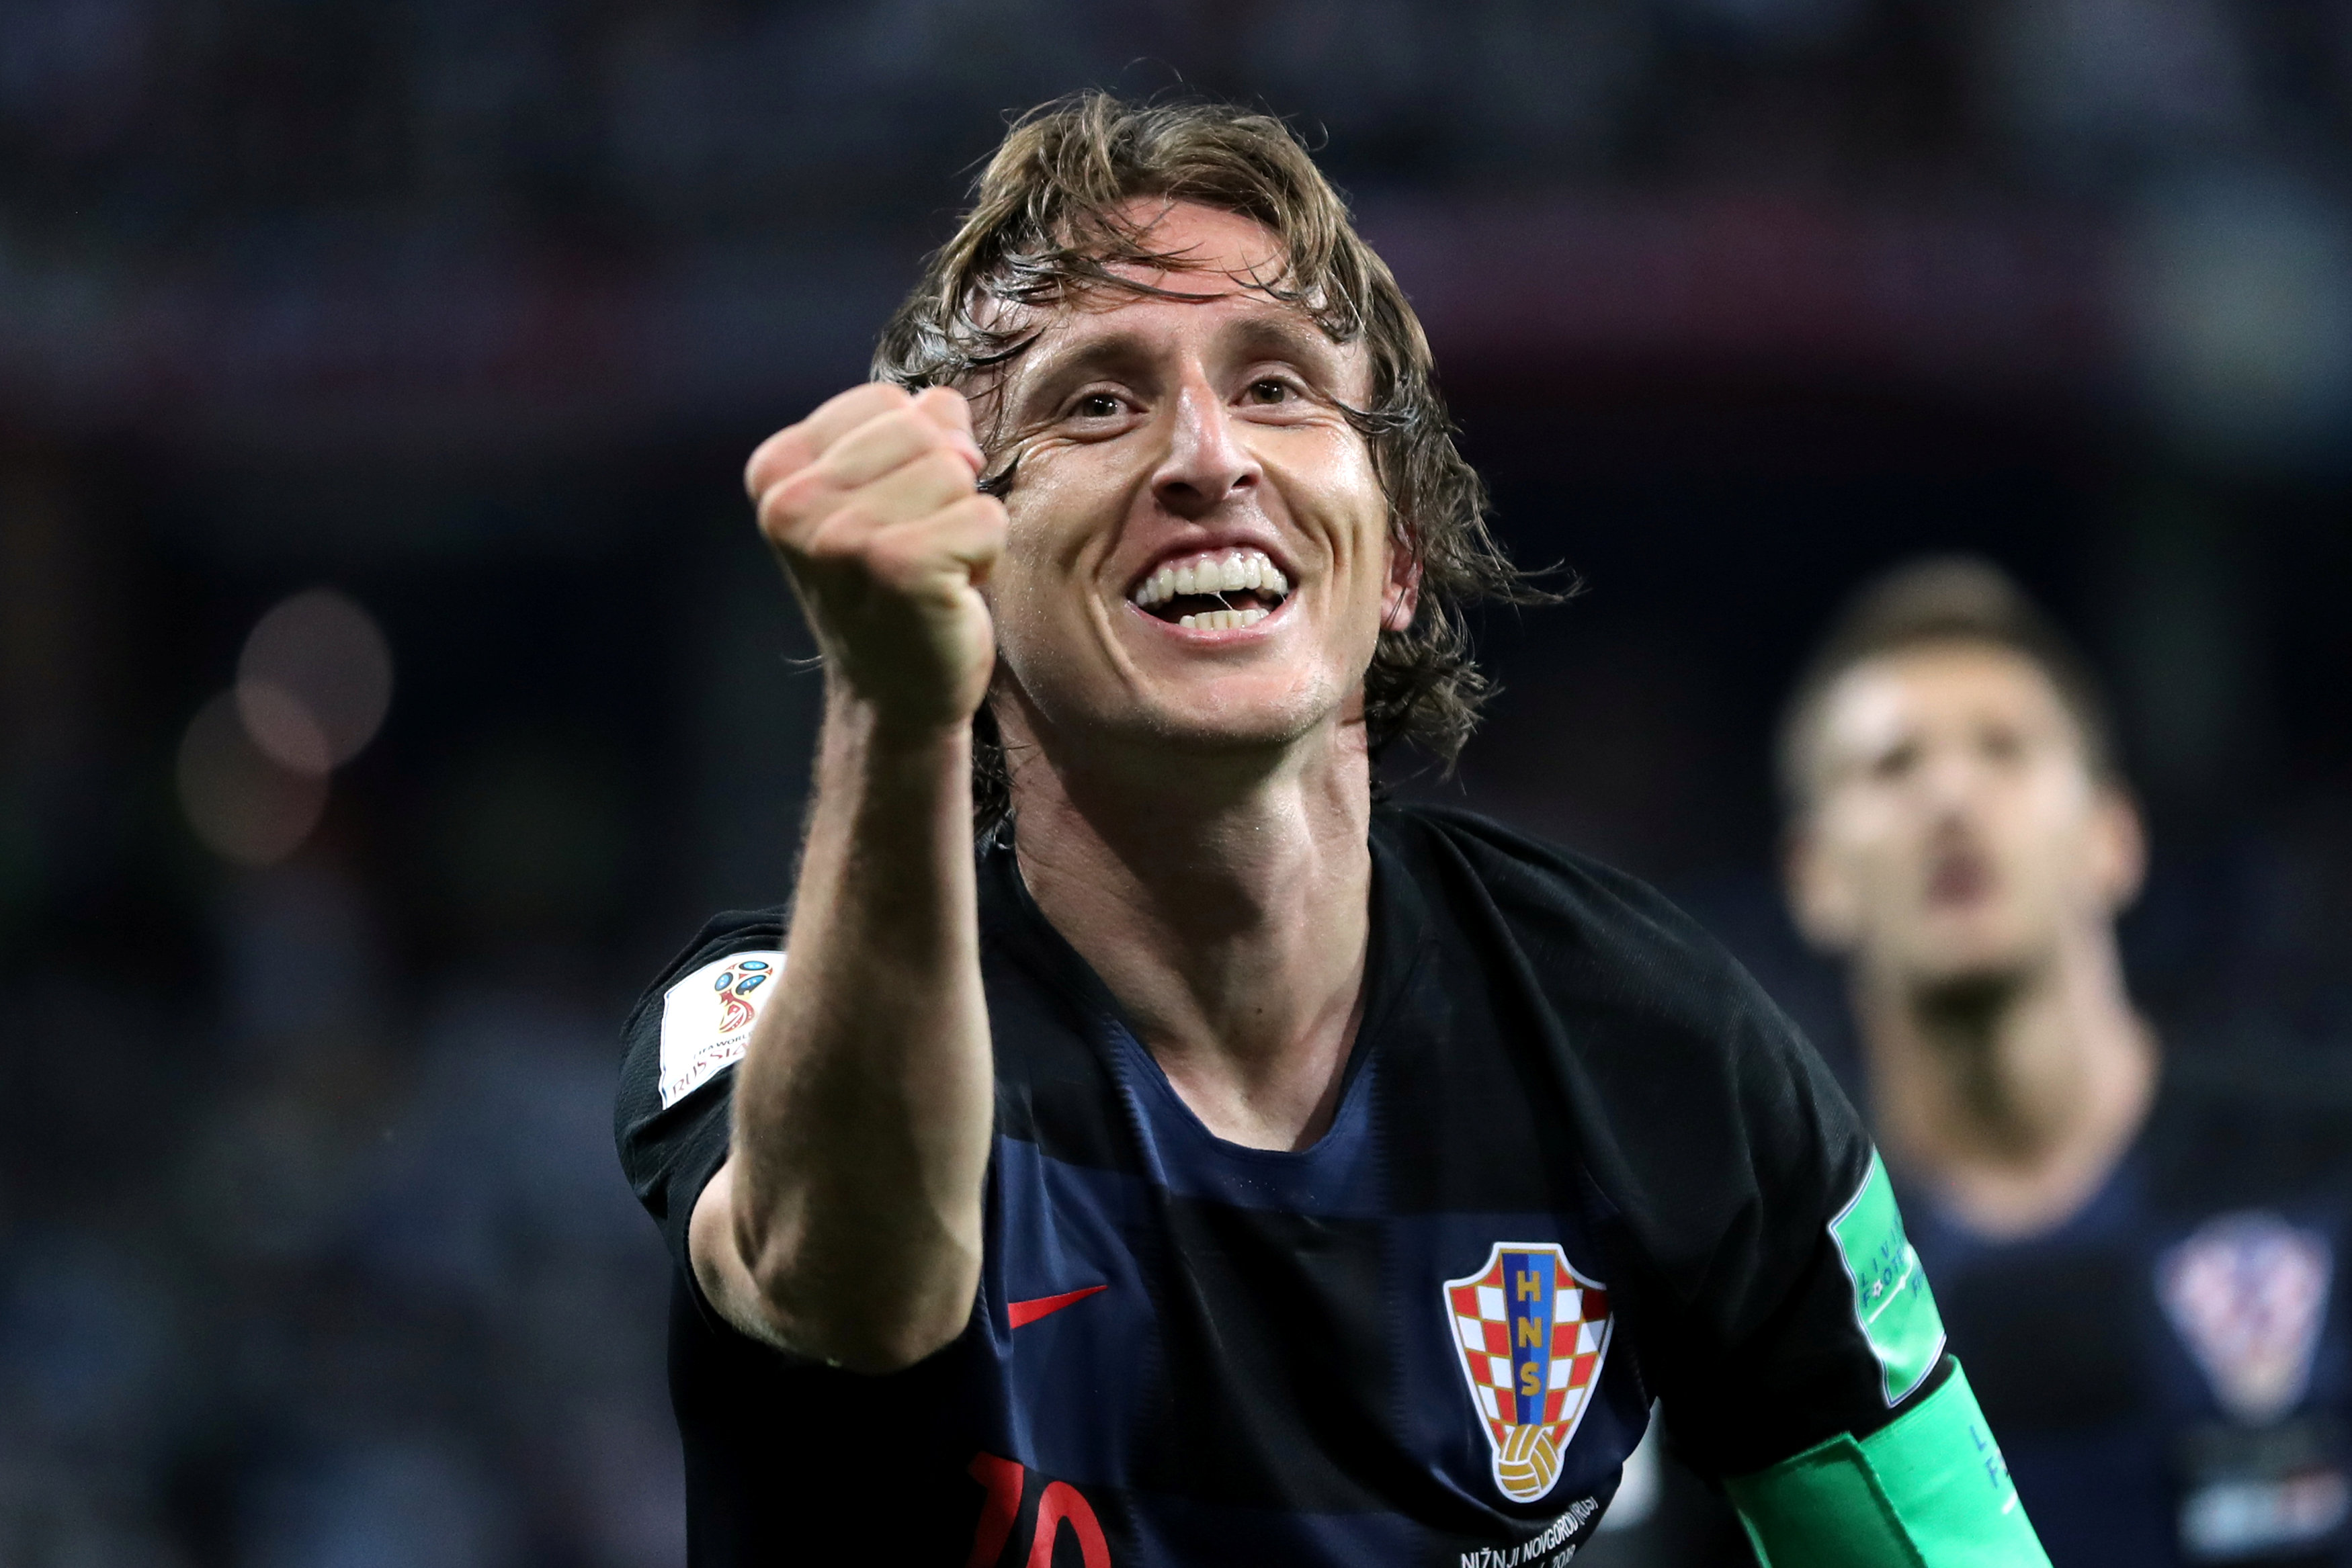 Modric played a huge part in taking Croatia into the World Cup finals